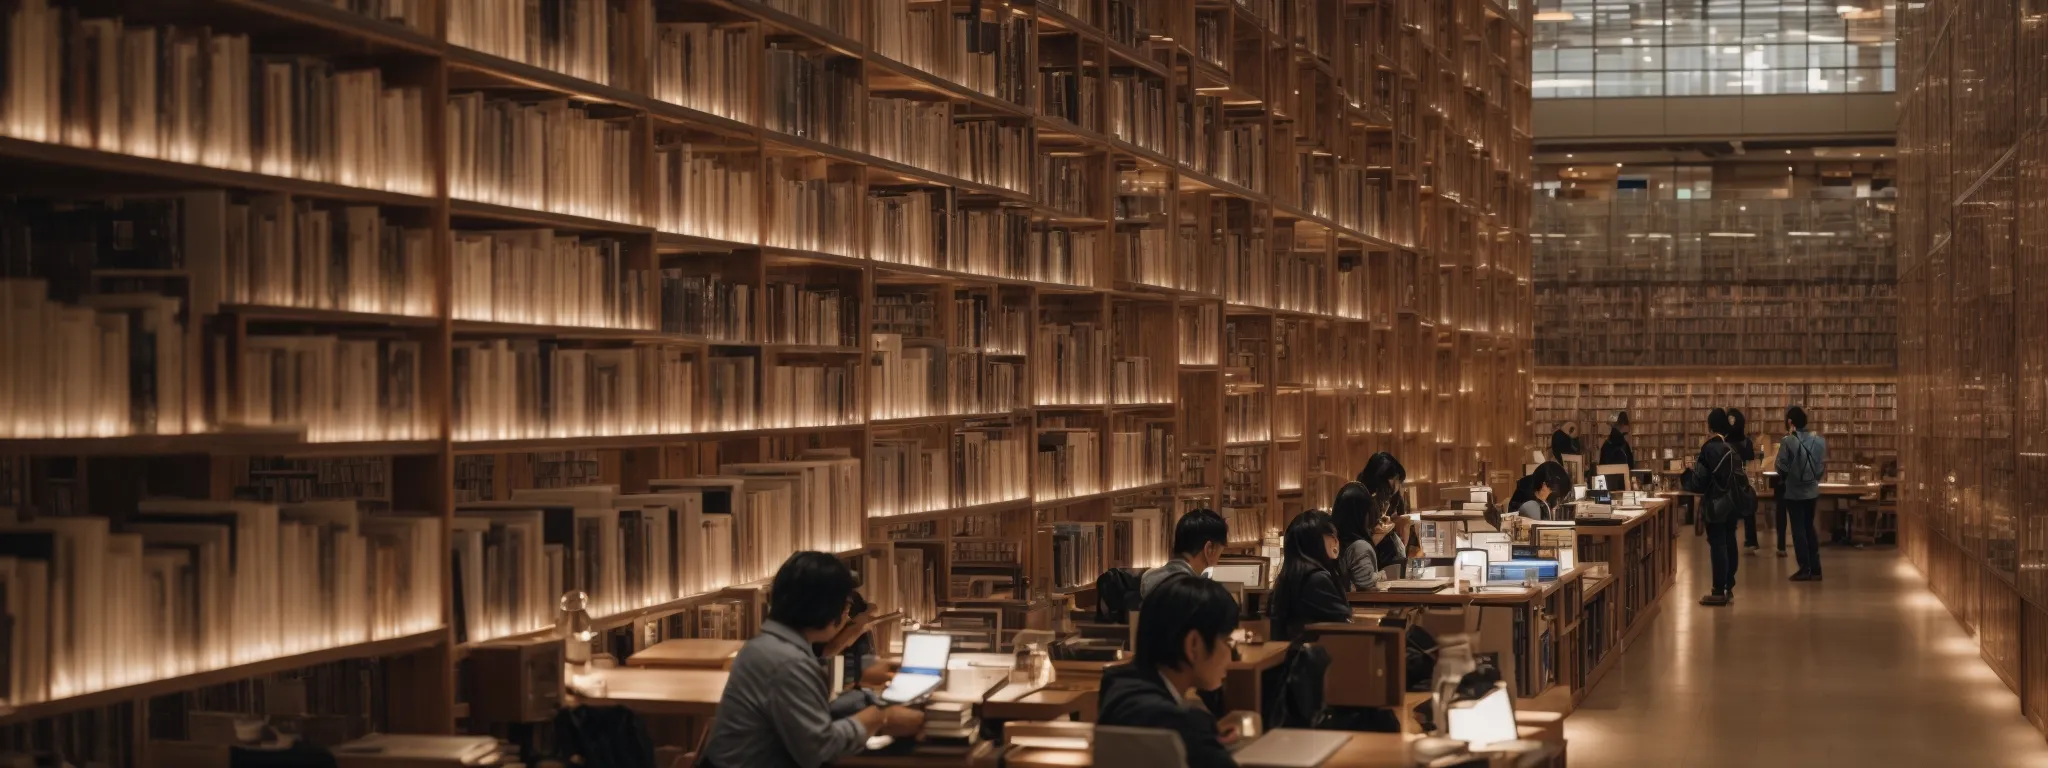 a bustling, modern library with readers browsing through digital tablets along a wall of virtual bookshelves glowing with labels.